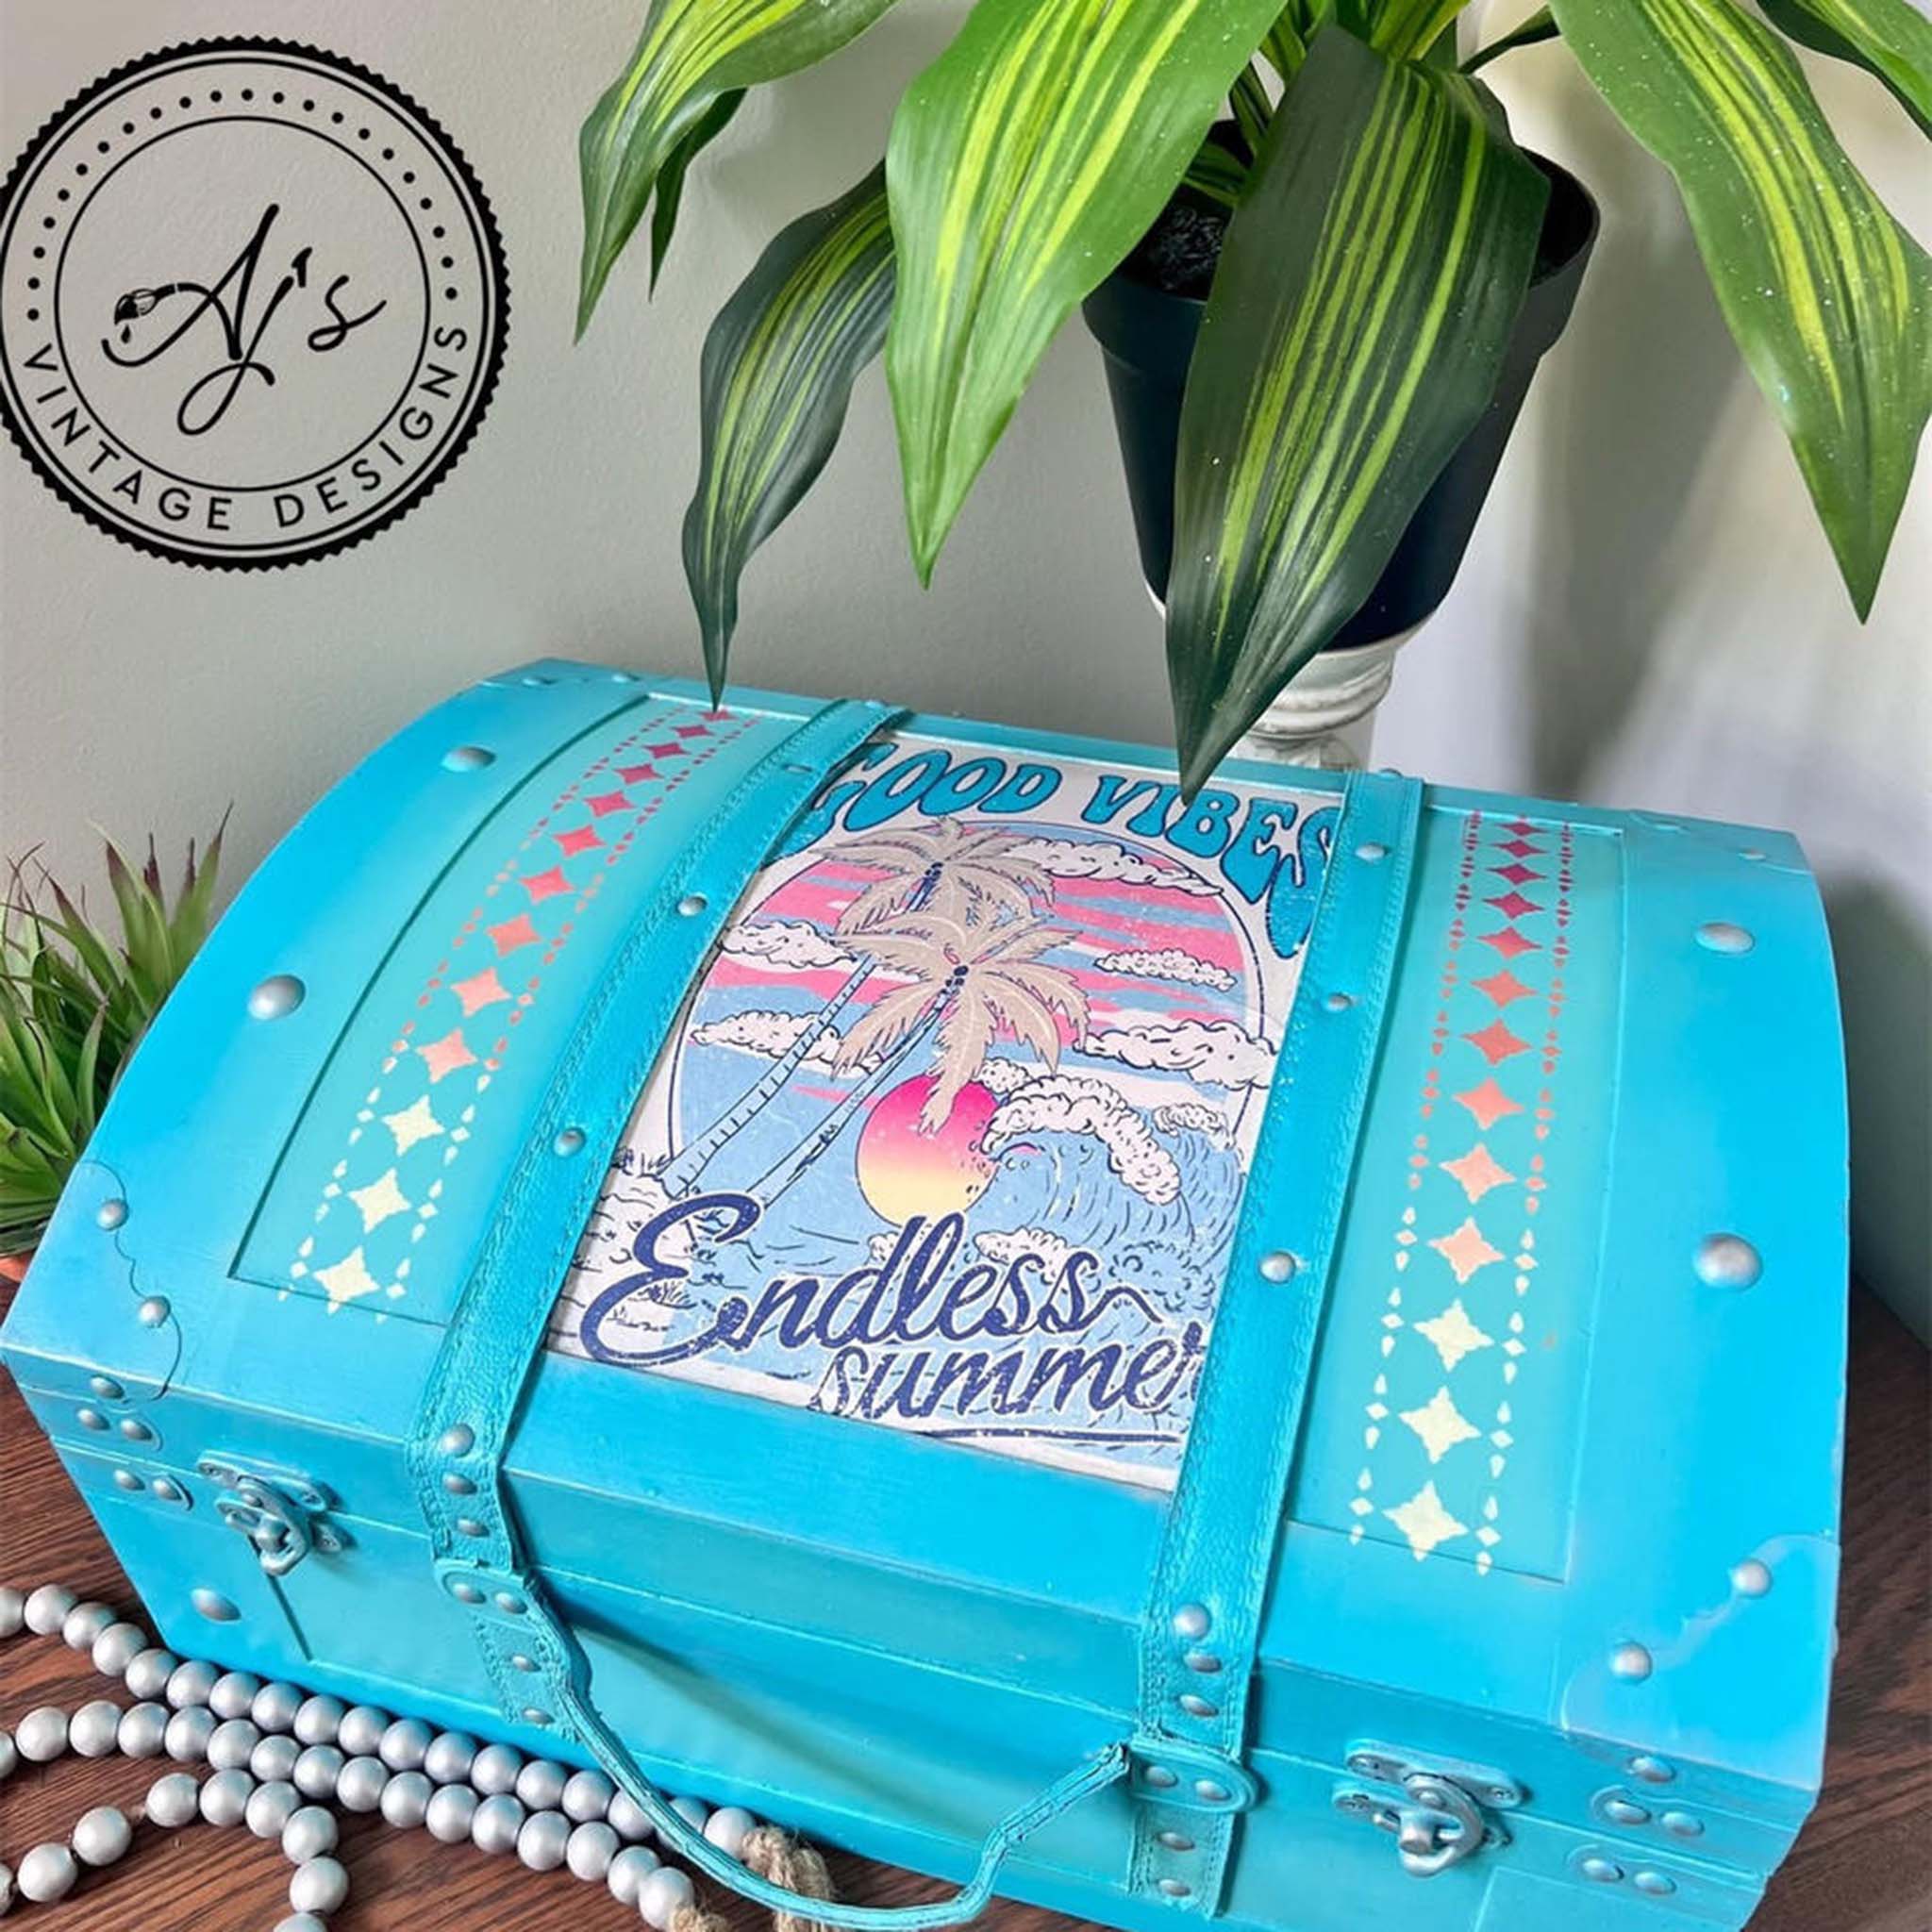 A vintage suitcase refurbished by AJ's Vintage Designs is painted sky blue and features Belles and Whistles' Endless Summer A4 rice paper on it.